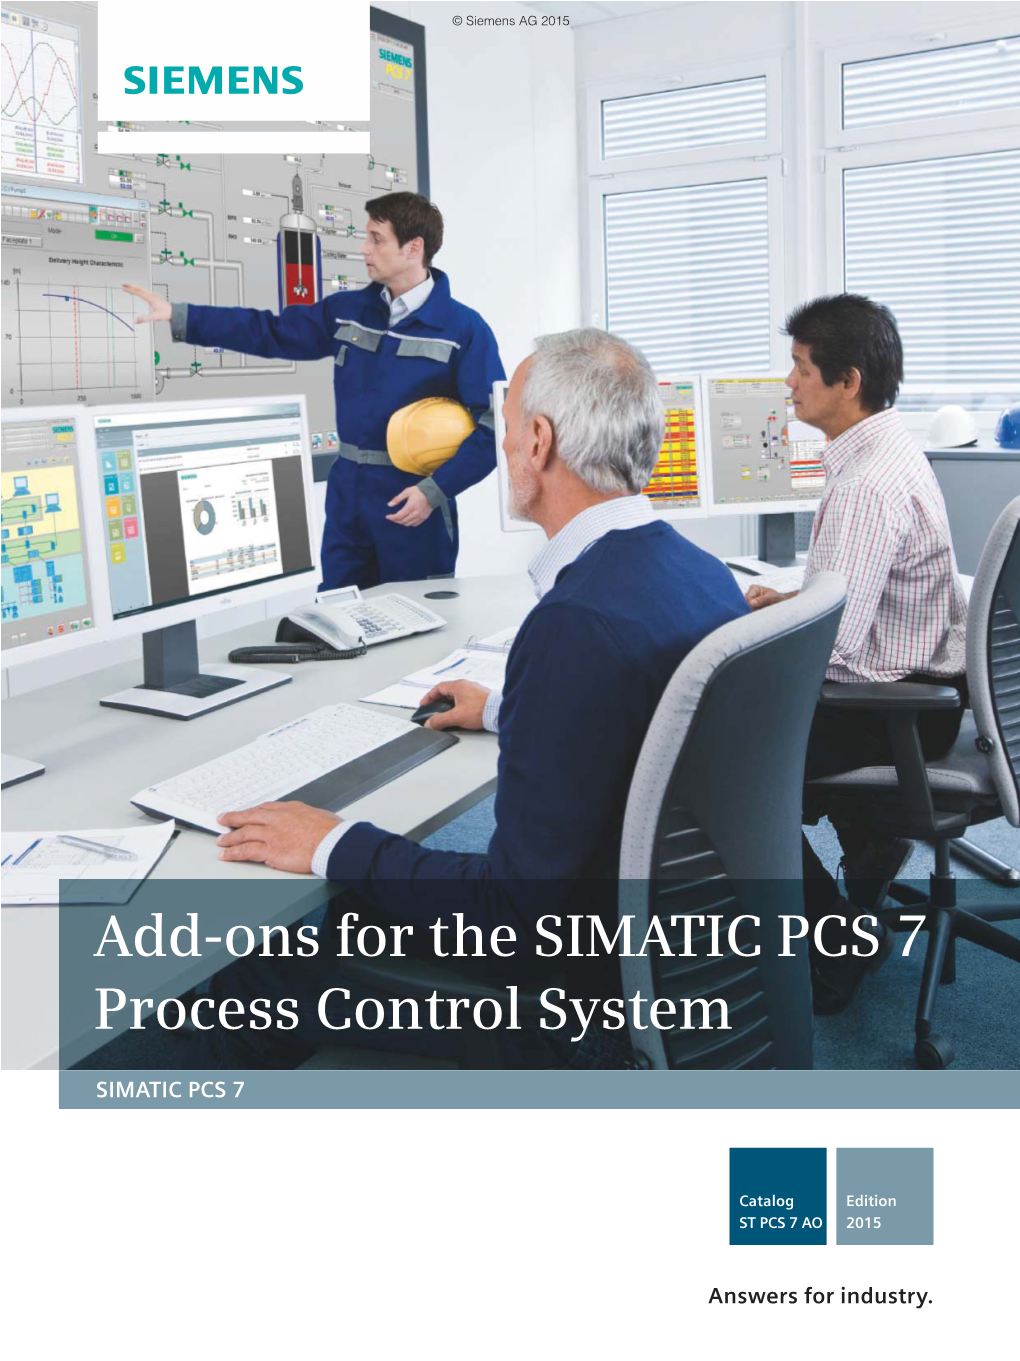 Add Ons for Simatic PCS 7